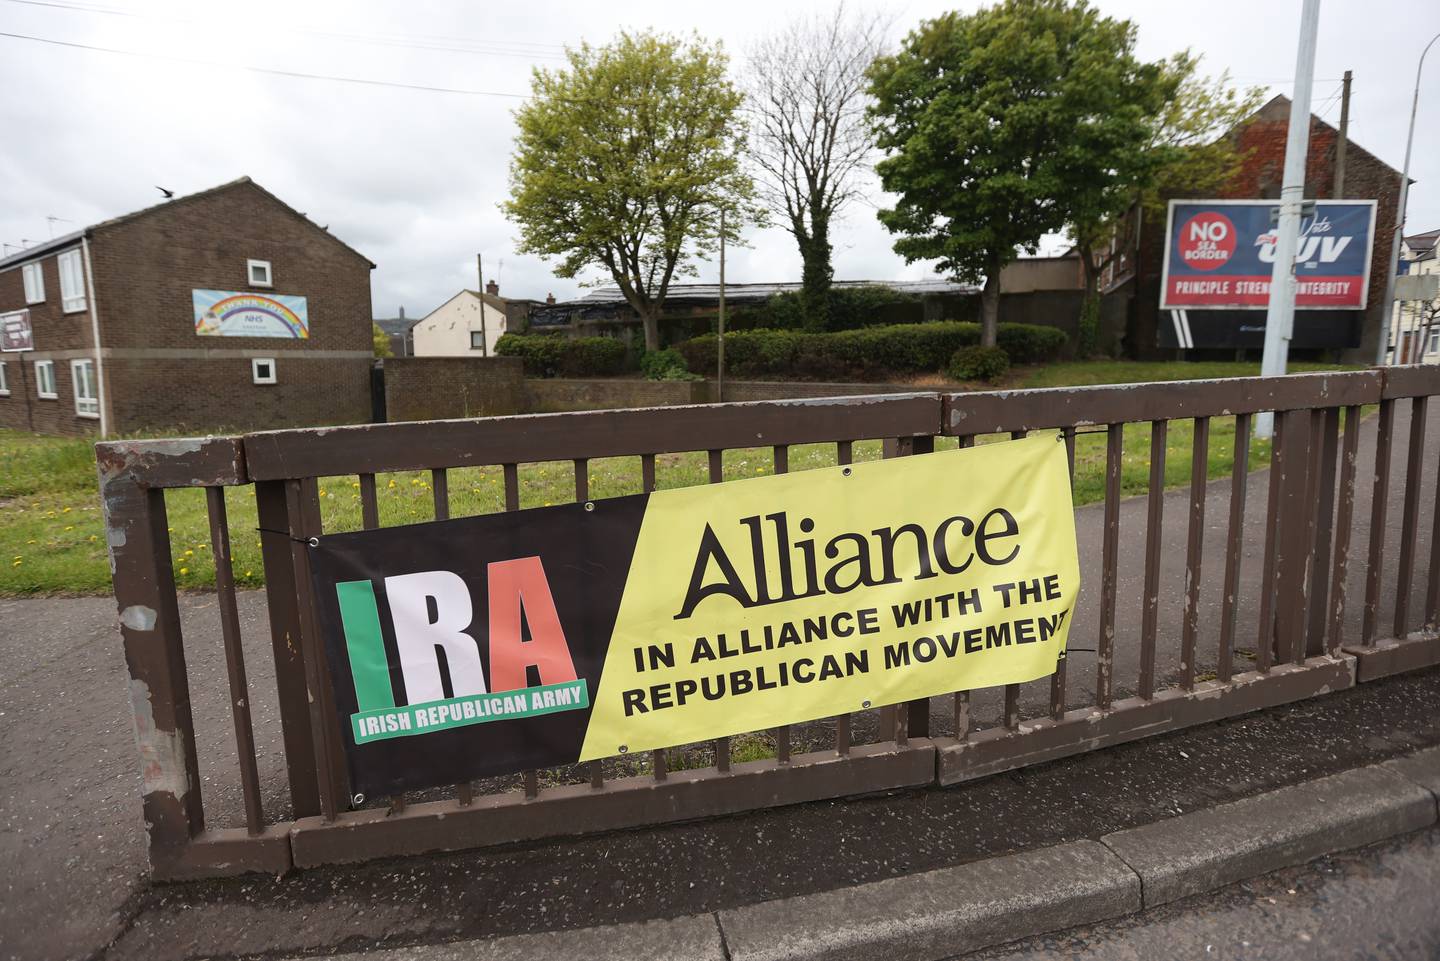 A banner alleging links between the Alliance Party and the IRA is displayed in Newtownards, County Down. PA